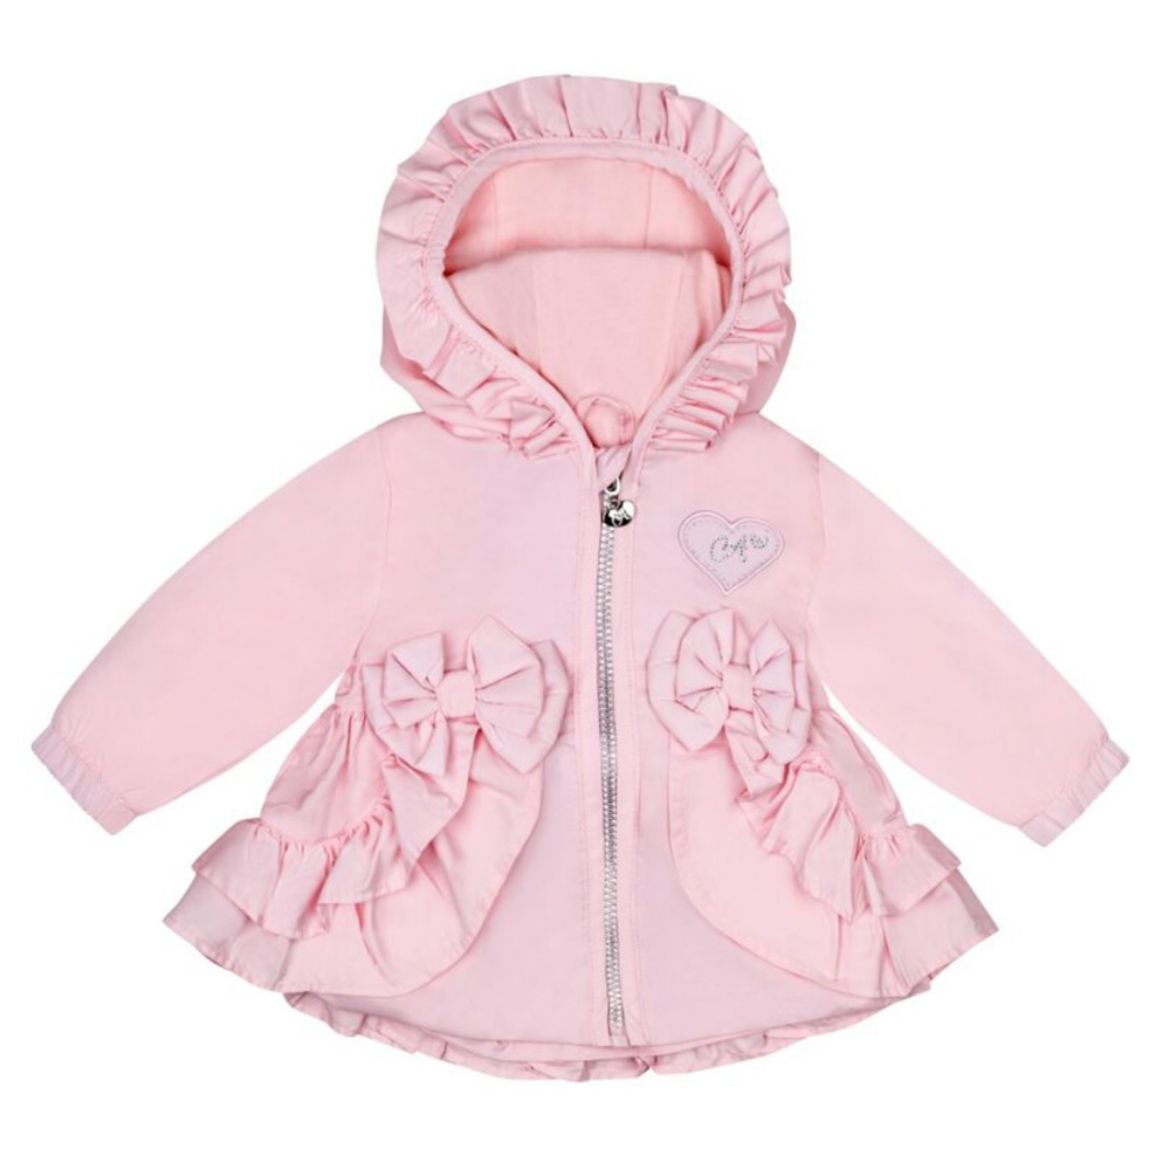 Picture of Little A Baby Girls 'Jillie' Pink Jacket